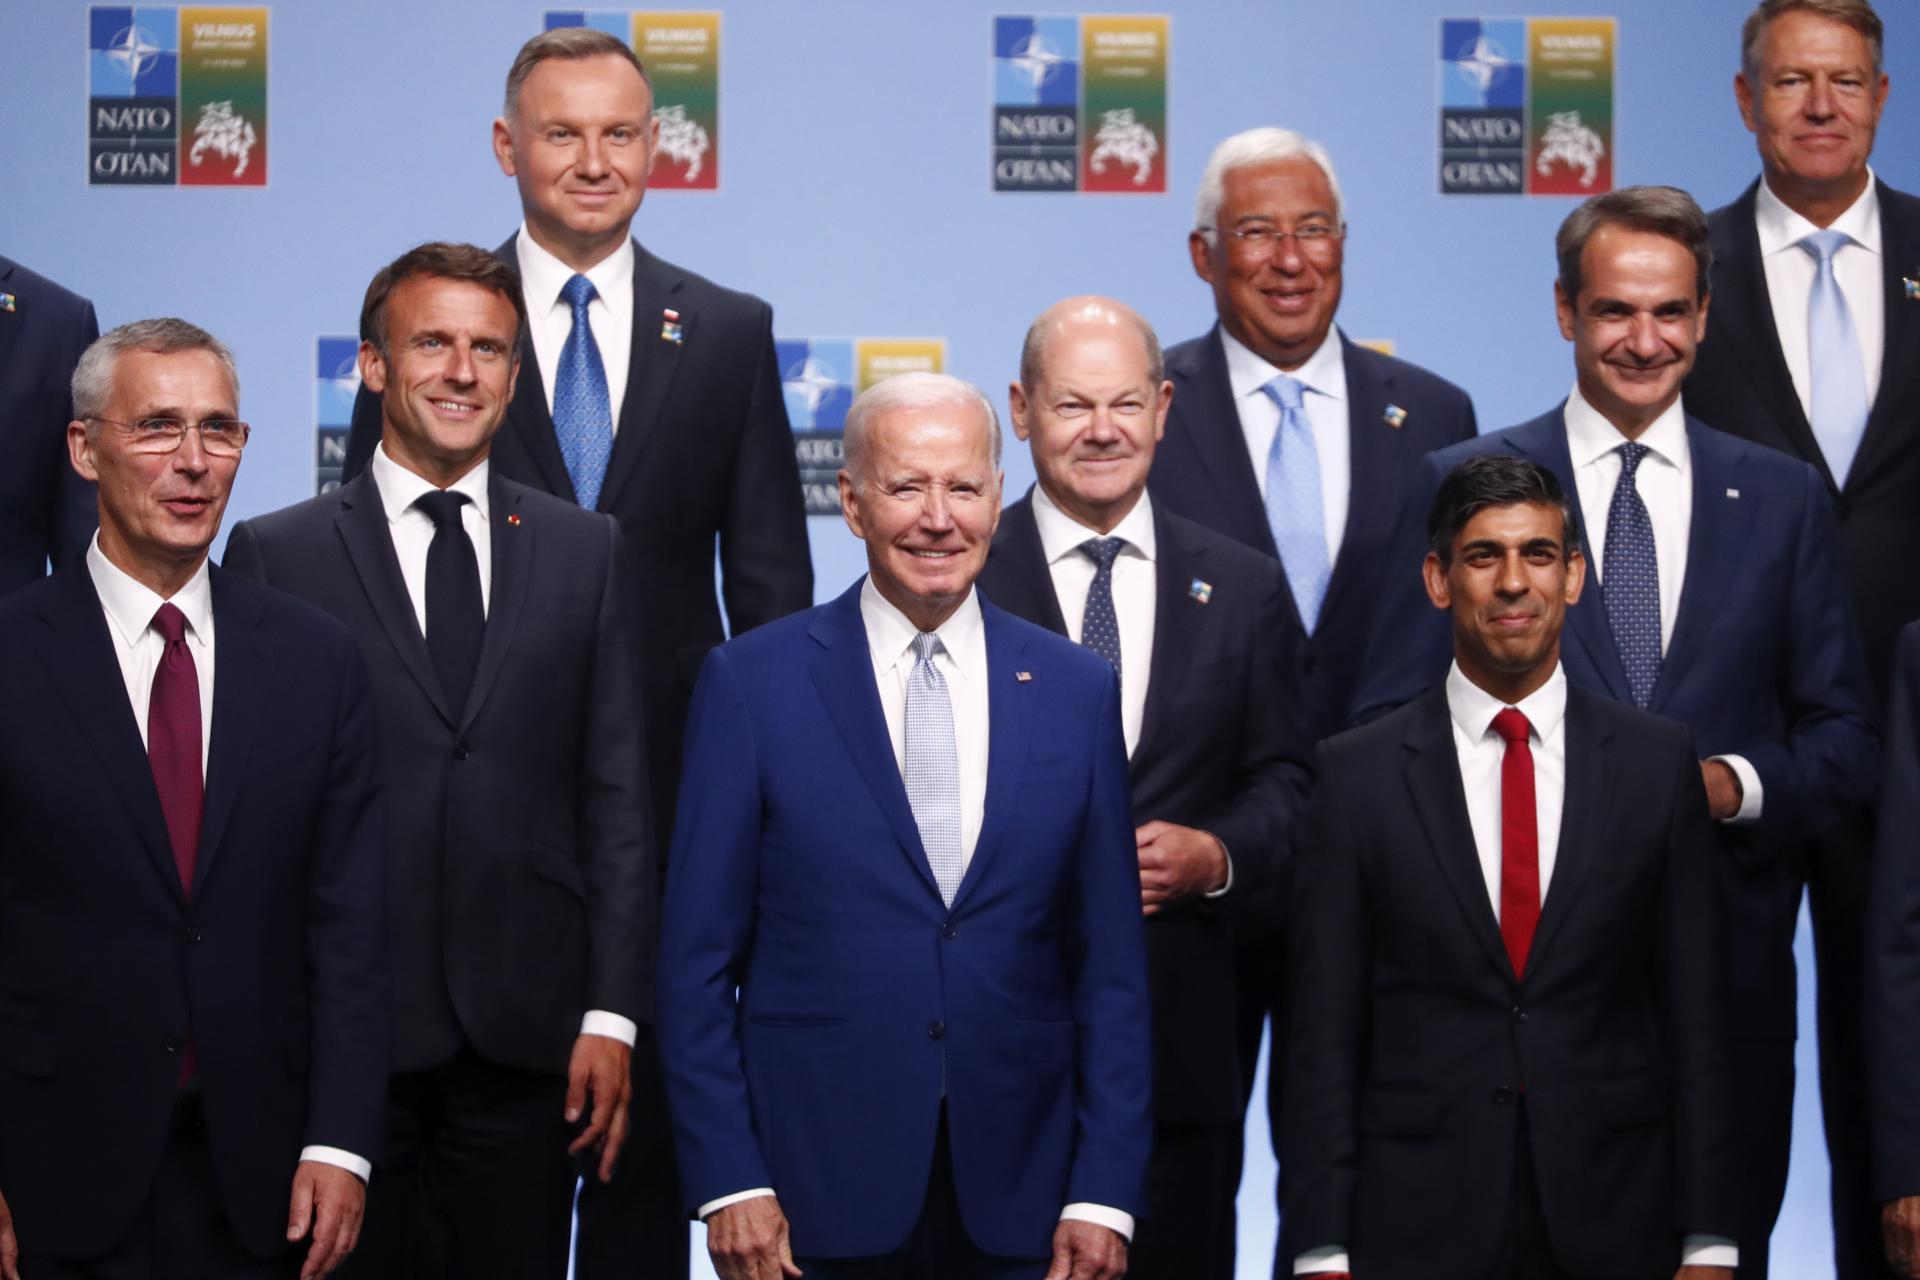 (L-R) NATO Secretary General Jens Stoltenberg along with French President Emmanuel Macron, Polish President Andzej Duda, US President Joe Biden, Gerrman Federal Chancellor Olaf Scholz, Portuguese Prime Minister Antonio Costa, British Prime Minister Rishi Sunak, Greek Prime Minister Kyriakos Mitsotakis and the President of Romania Klaus Iohannis pose for a group photo at the NATO summit in Vilnius, Lithuania, 11 July 2023. EFE/EPA/TOMS KALNINS